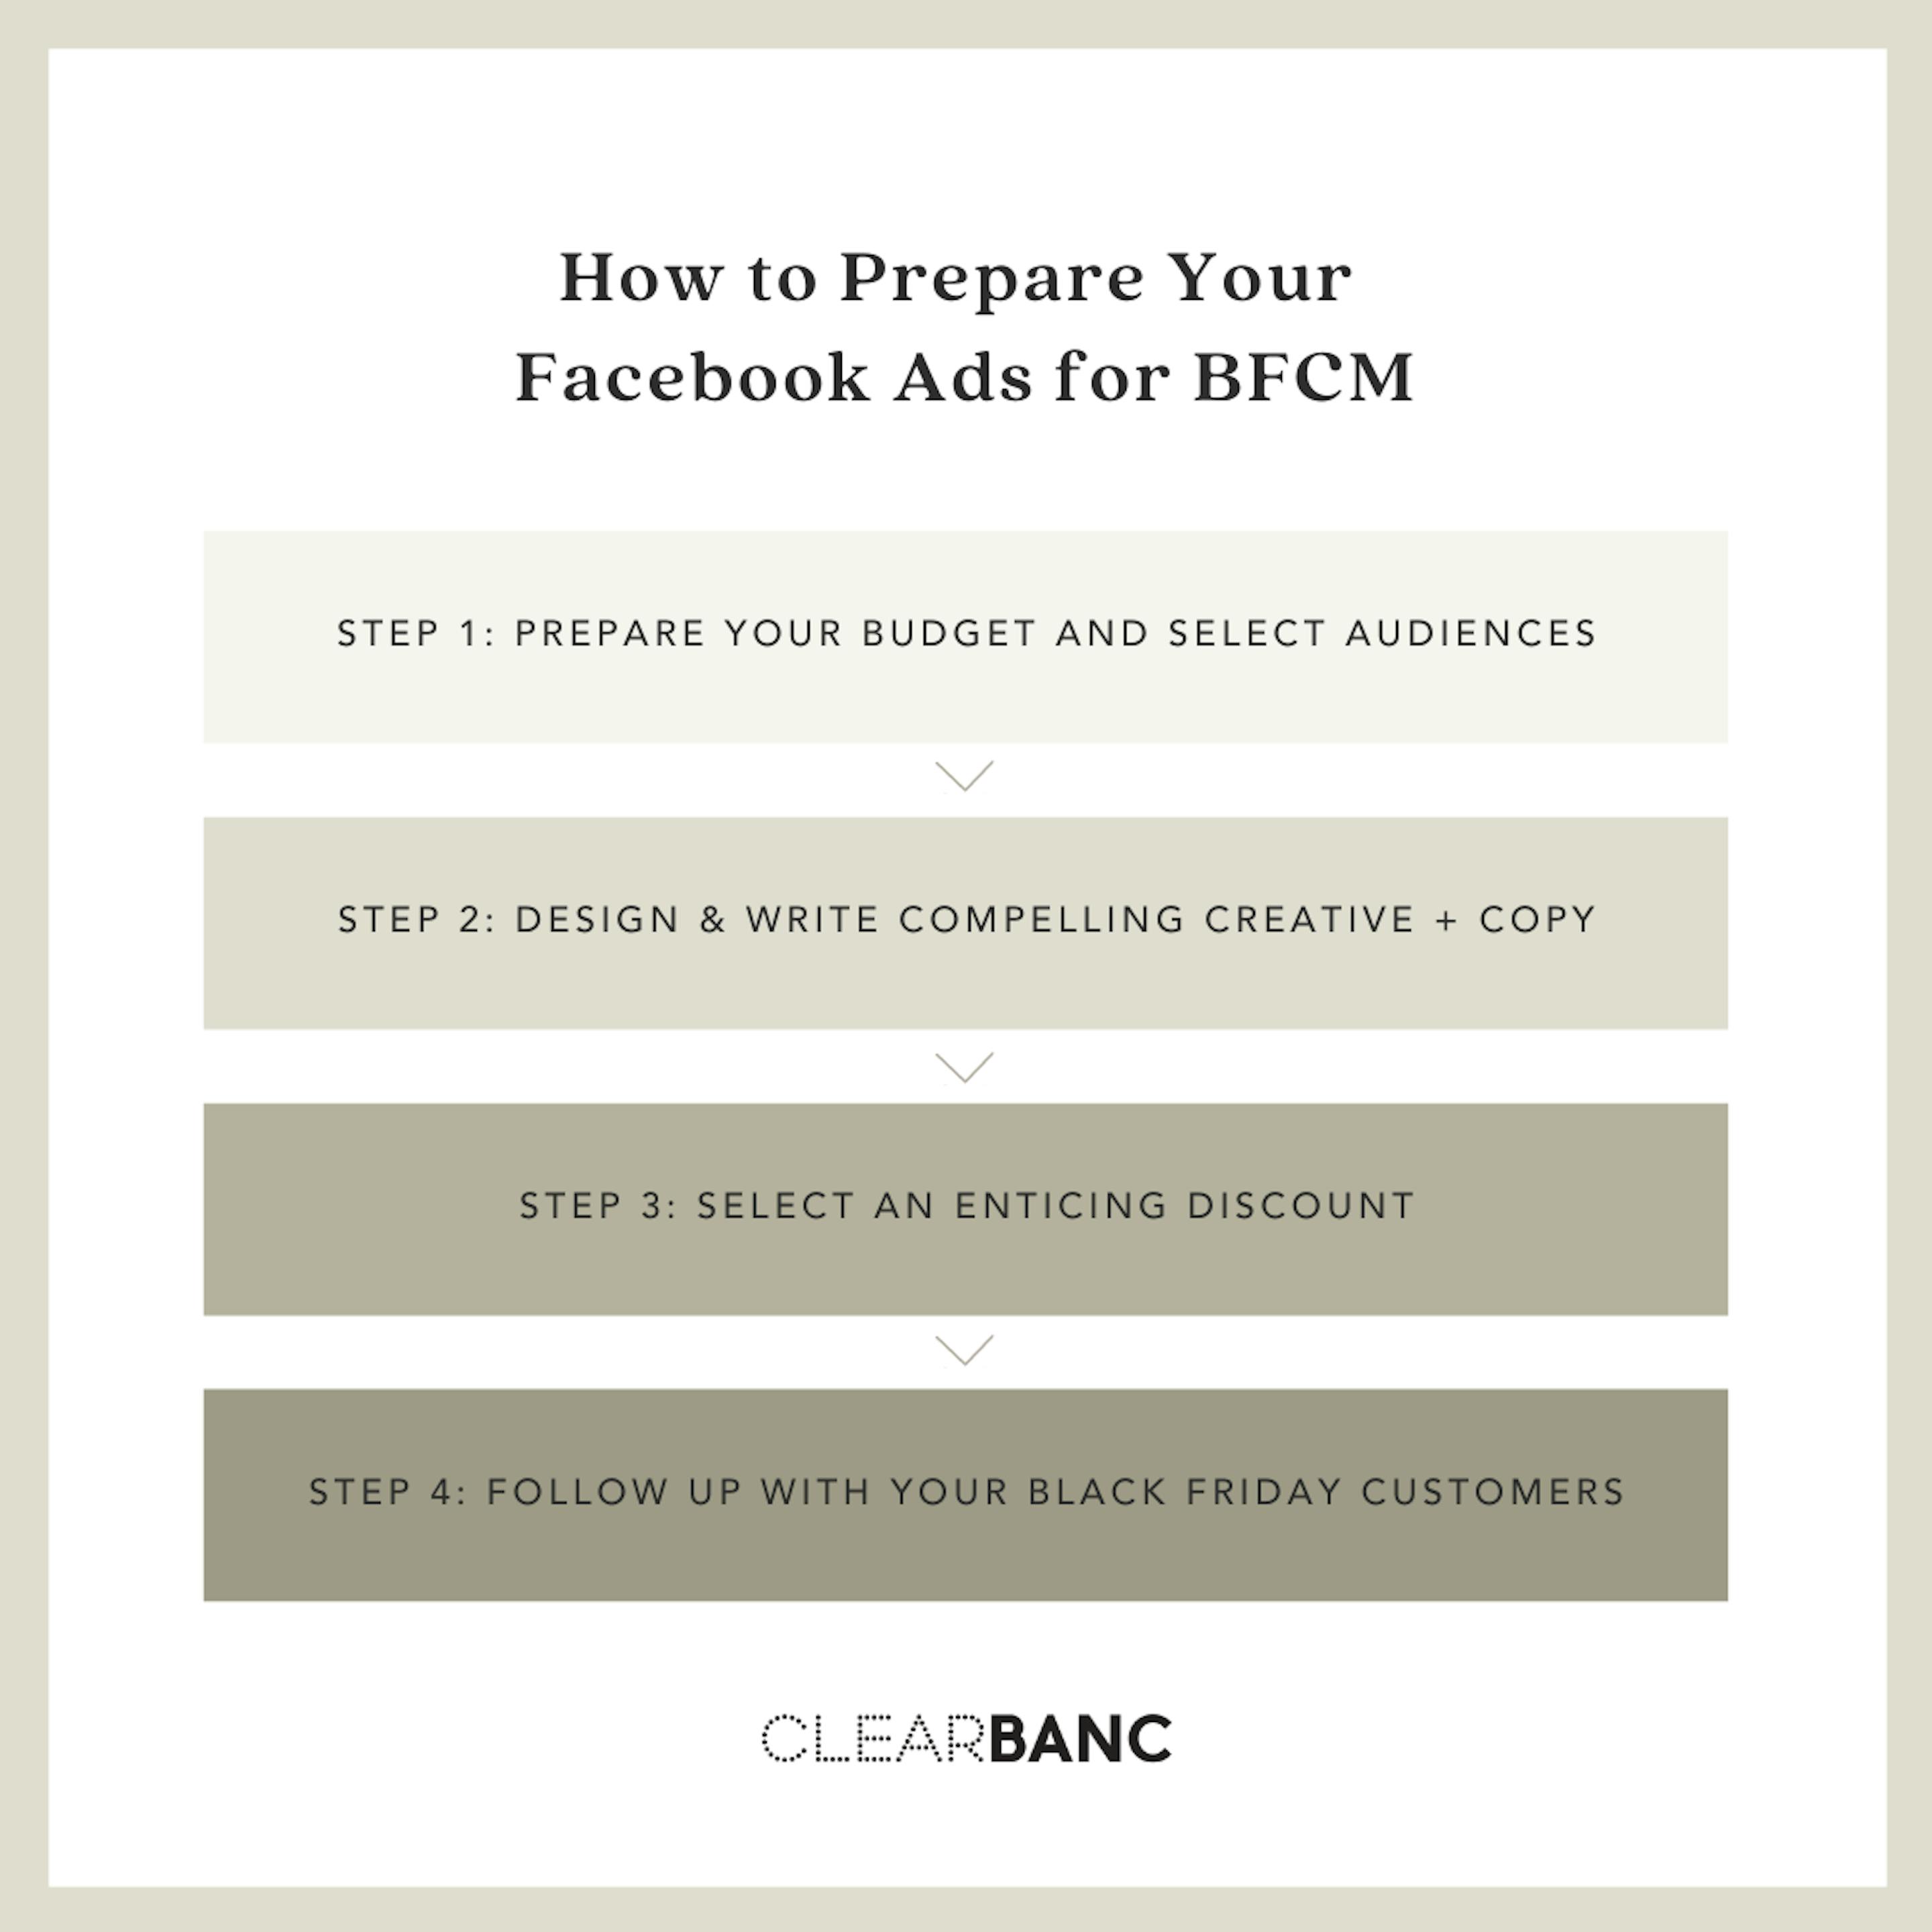 How to prepare your facebook ads for BFCM